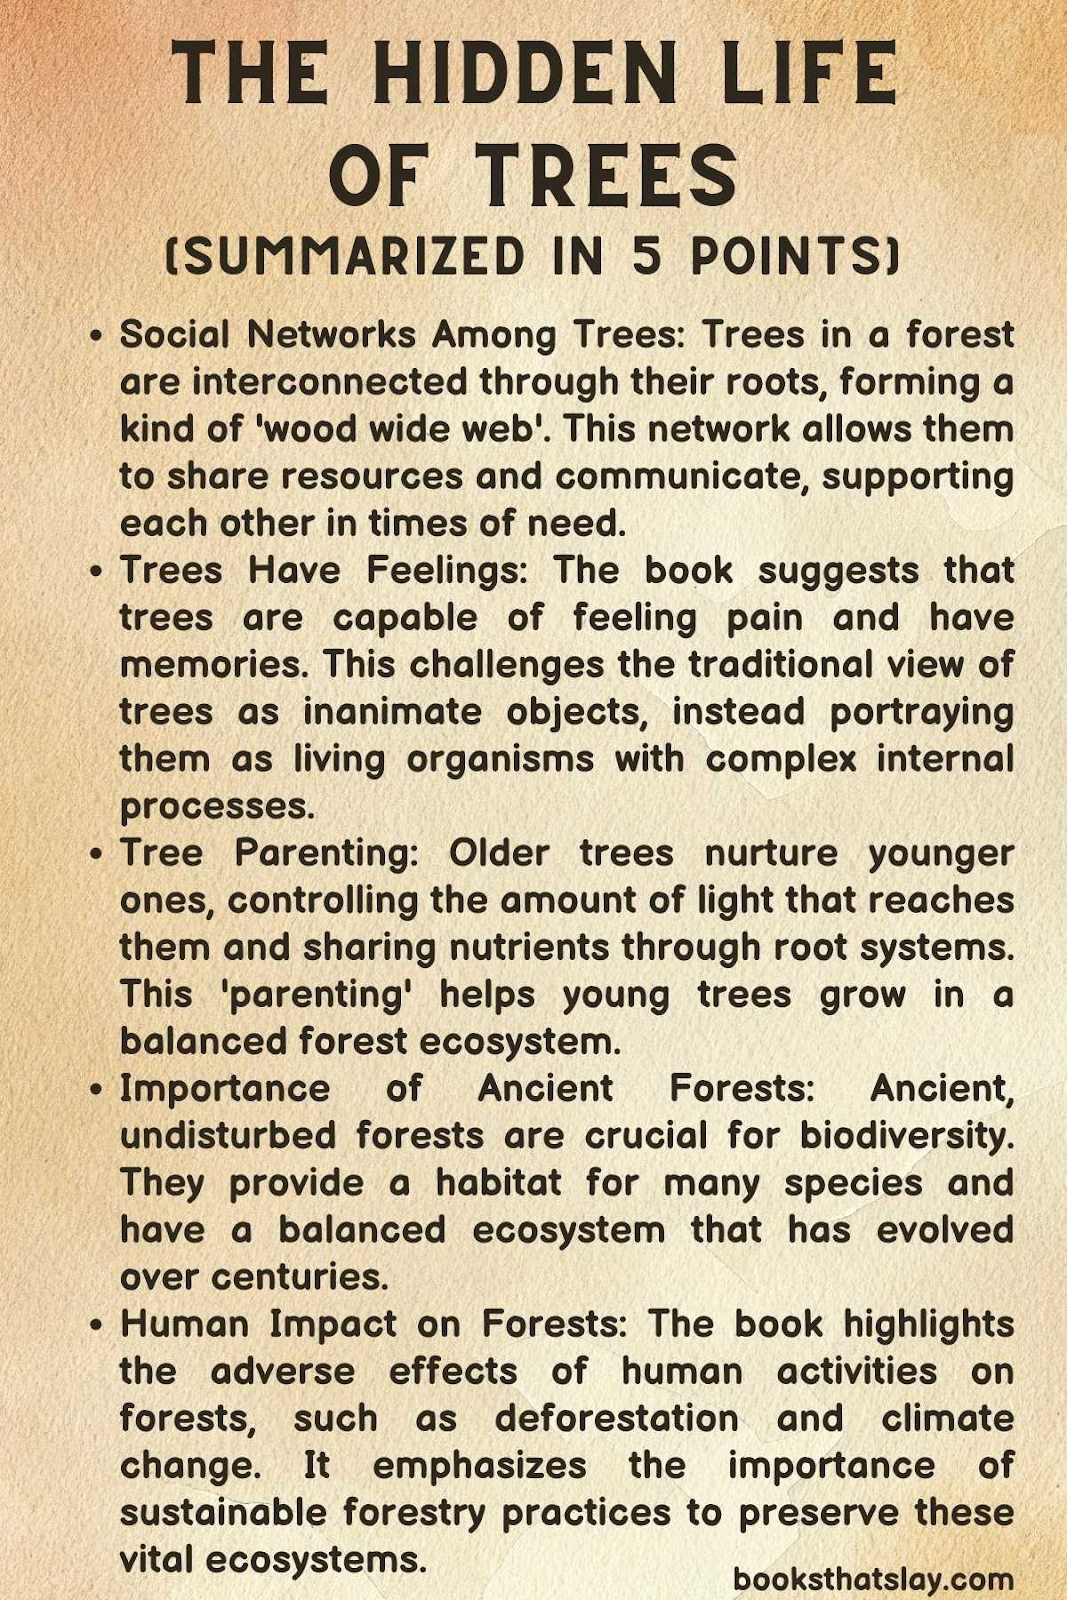 The Hidden Life of Trees Summary and Key Lessons